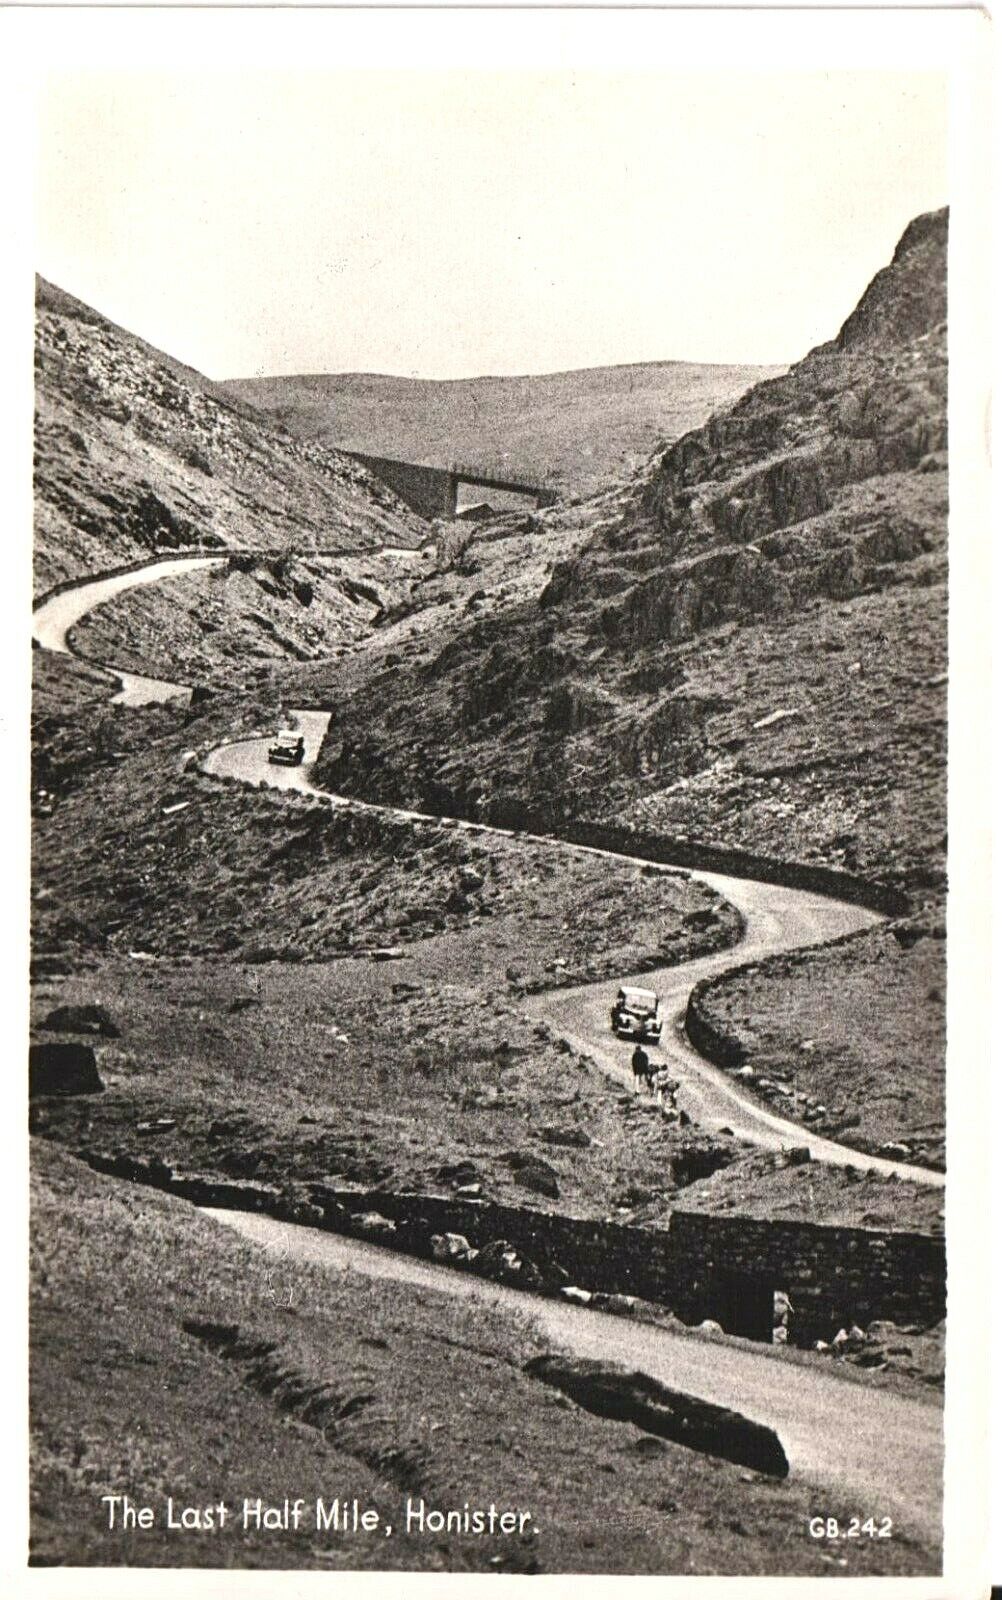 House Clearance - THE LAST HALF MILE, HONISTER.Real Photographic Service Late 1940s. Classic Cars